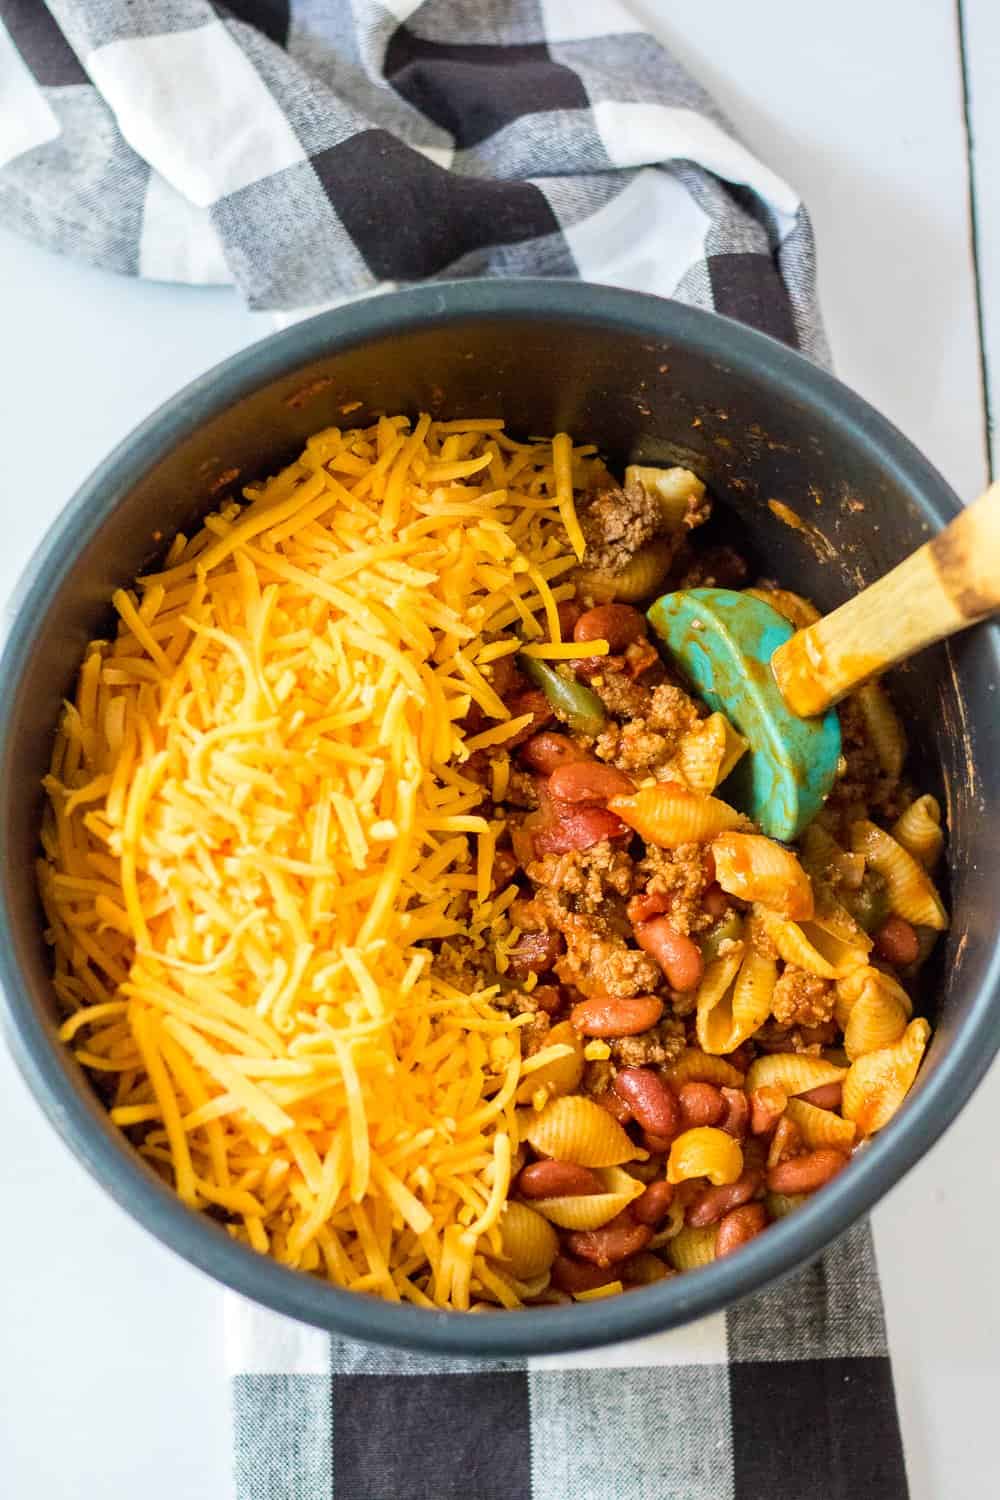 shredded cheddar cheese added to fully cooked taco pasta in the instant pot pressure cooker insert bowl.